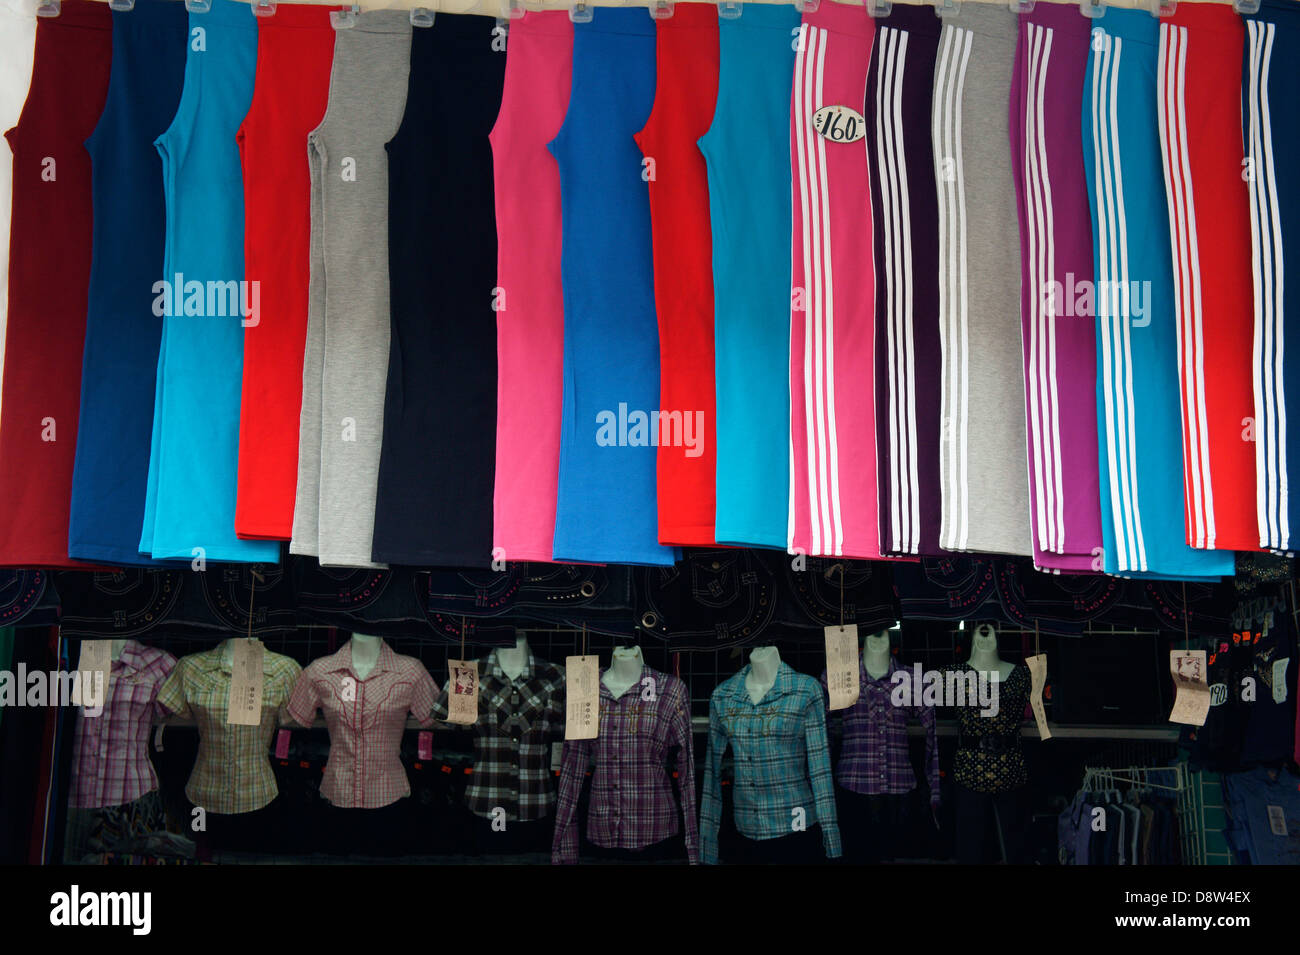 Women's sport Slacks and shirts for sale in a shopping mall in downtown Merida, Yucatan, Mexico Stock Photo